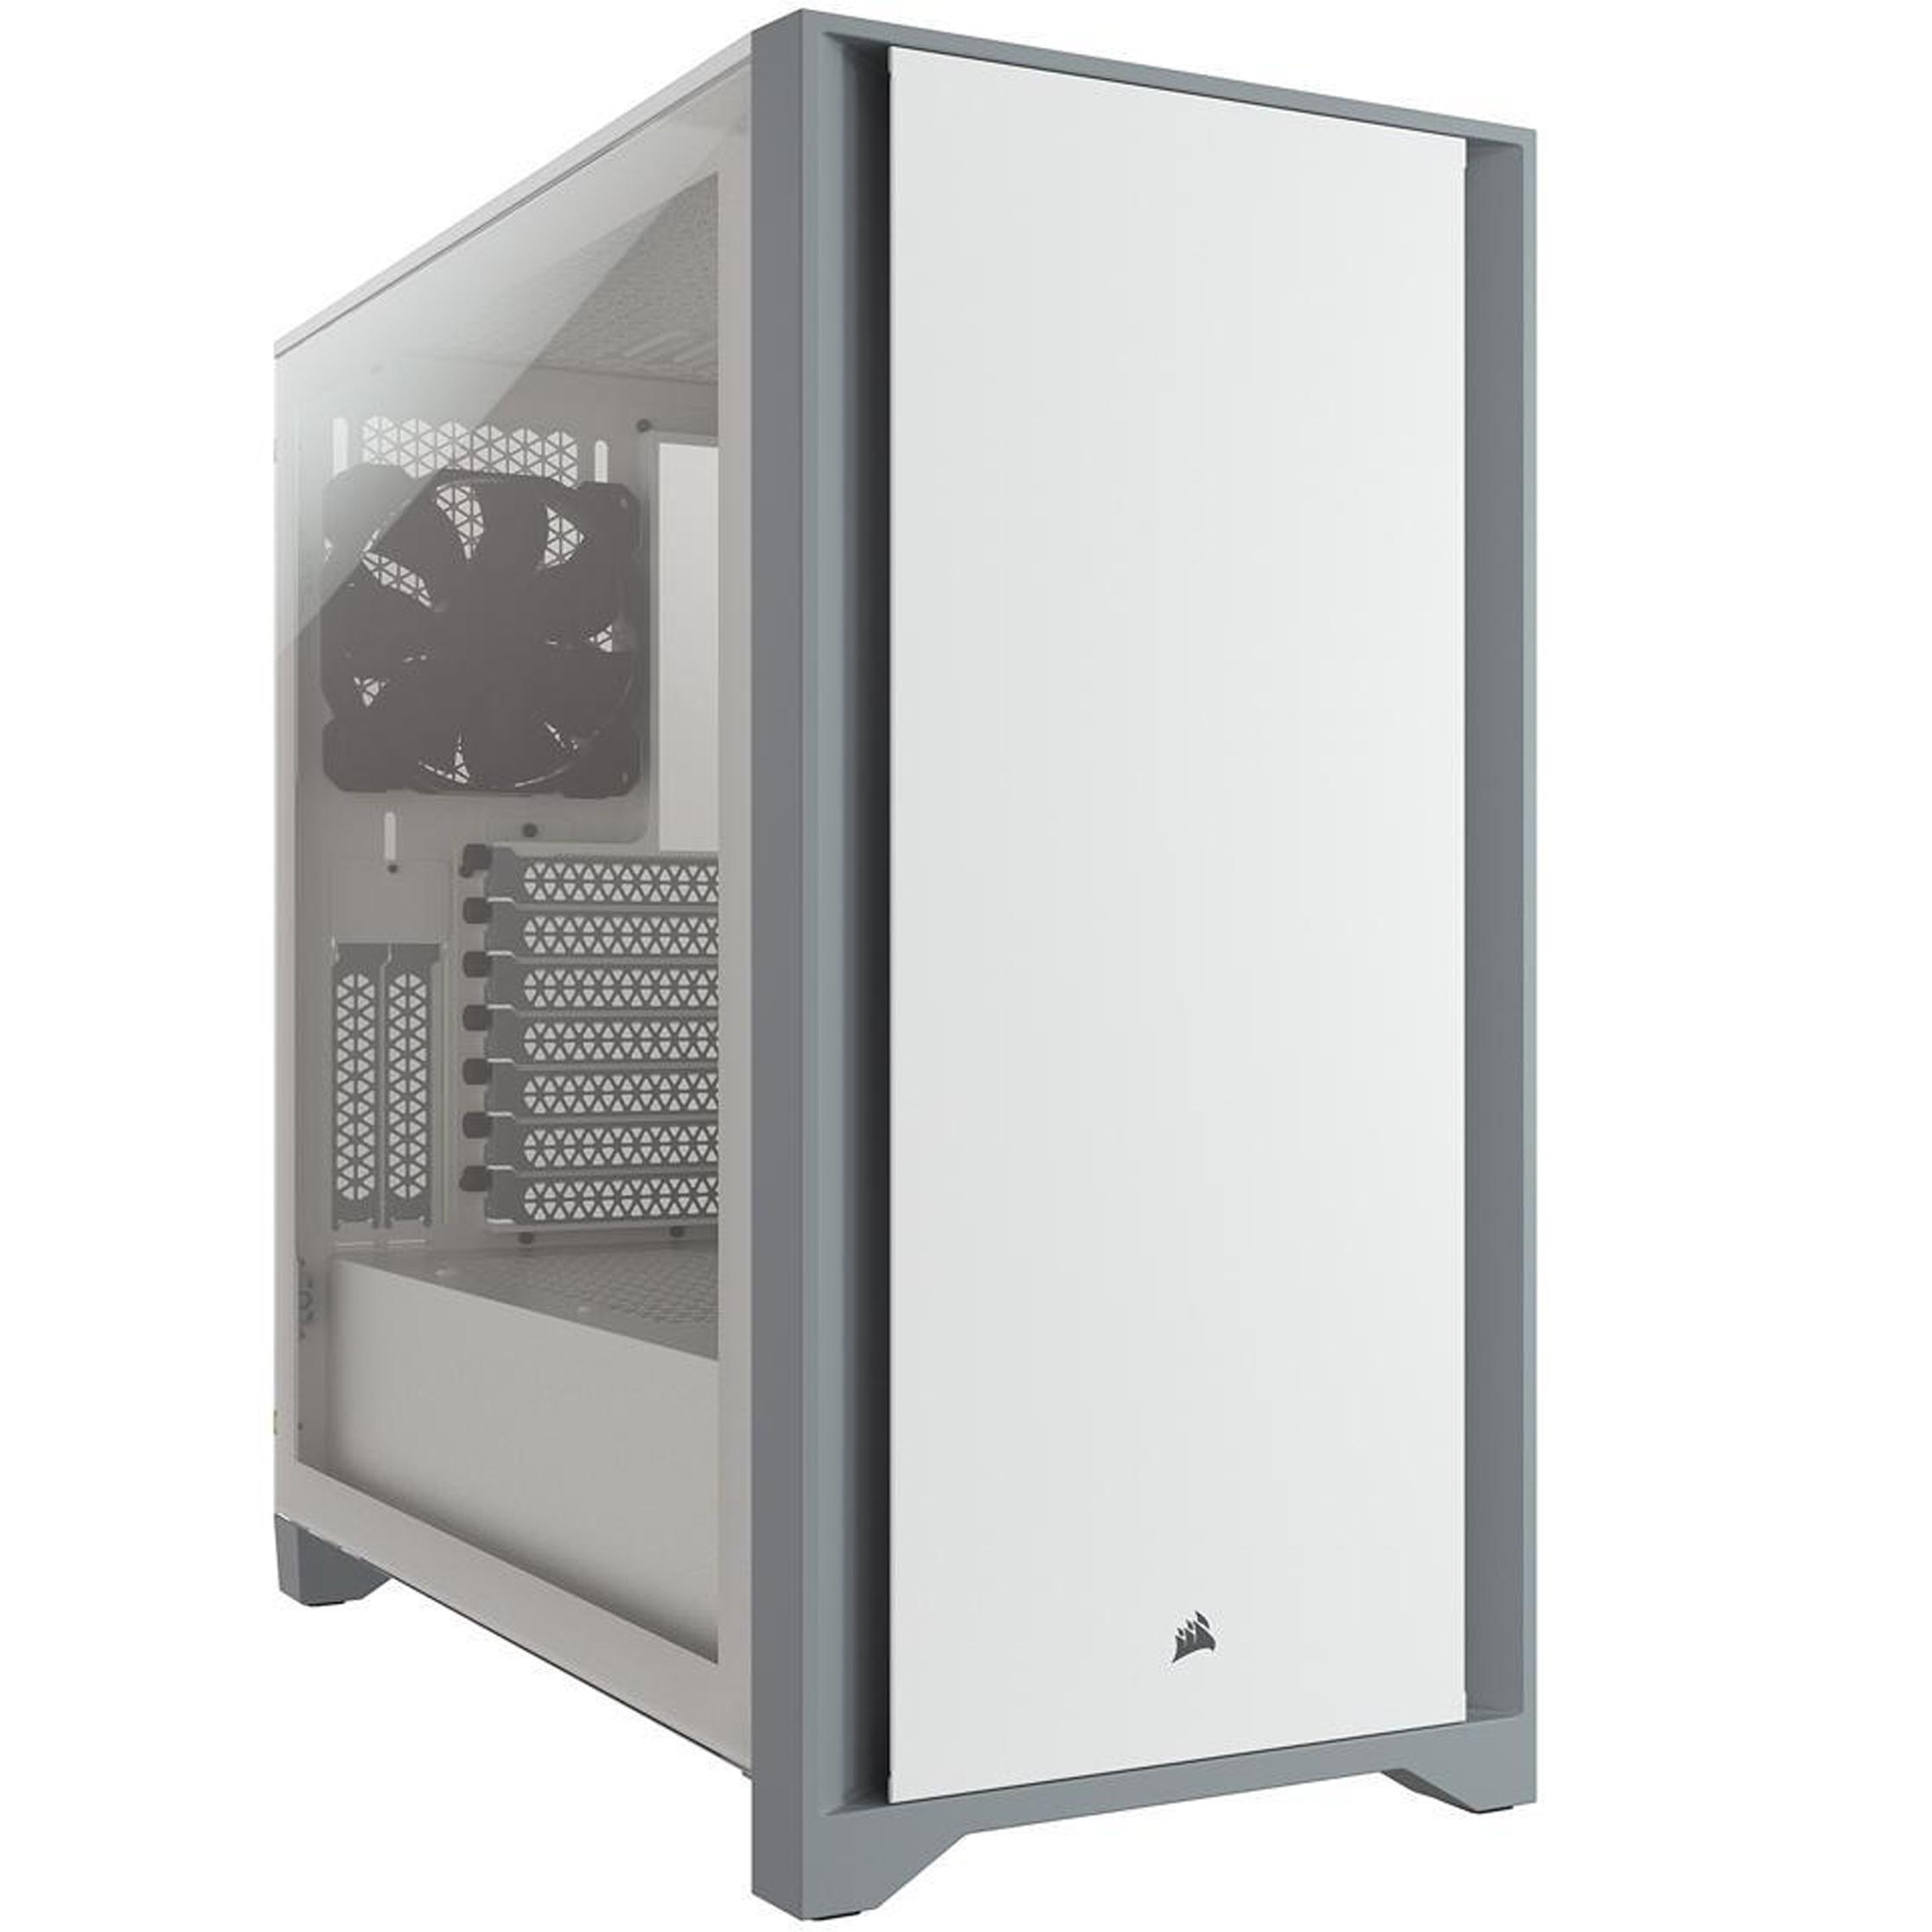 Corsair 4000D Tempered Glass ATX Mid Tower Computer Case for $54.99 Shipped